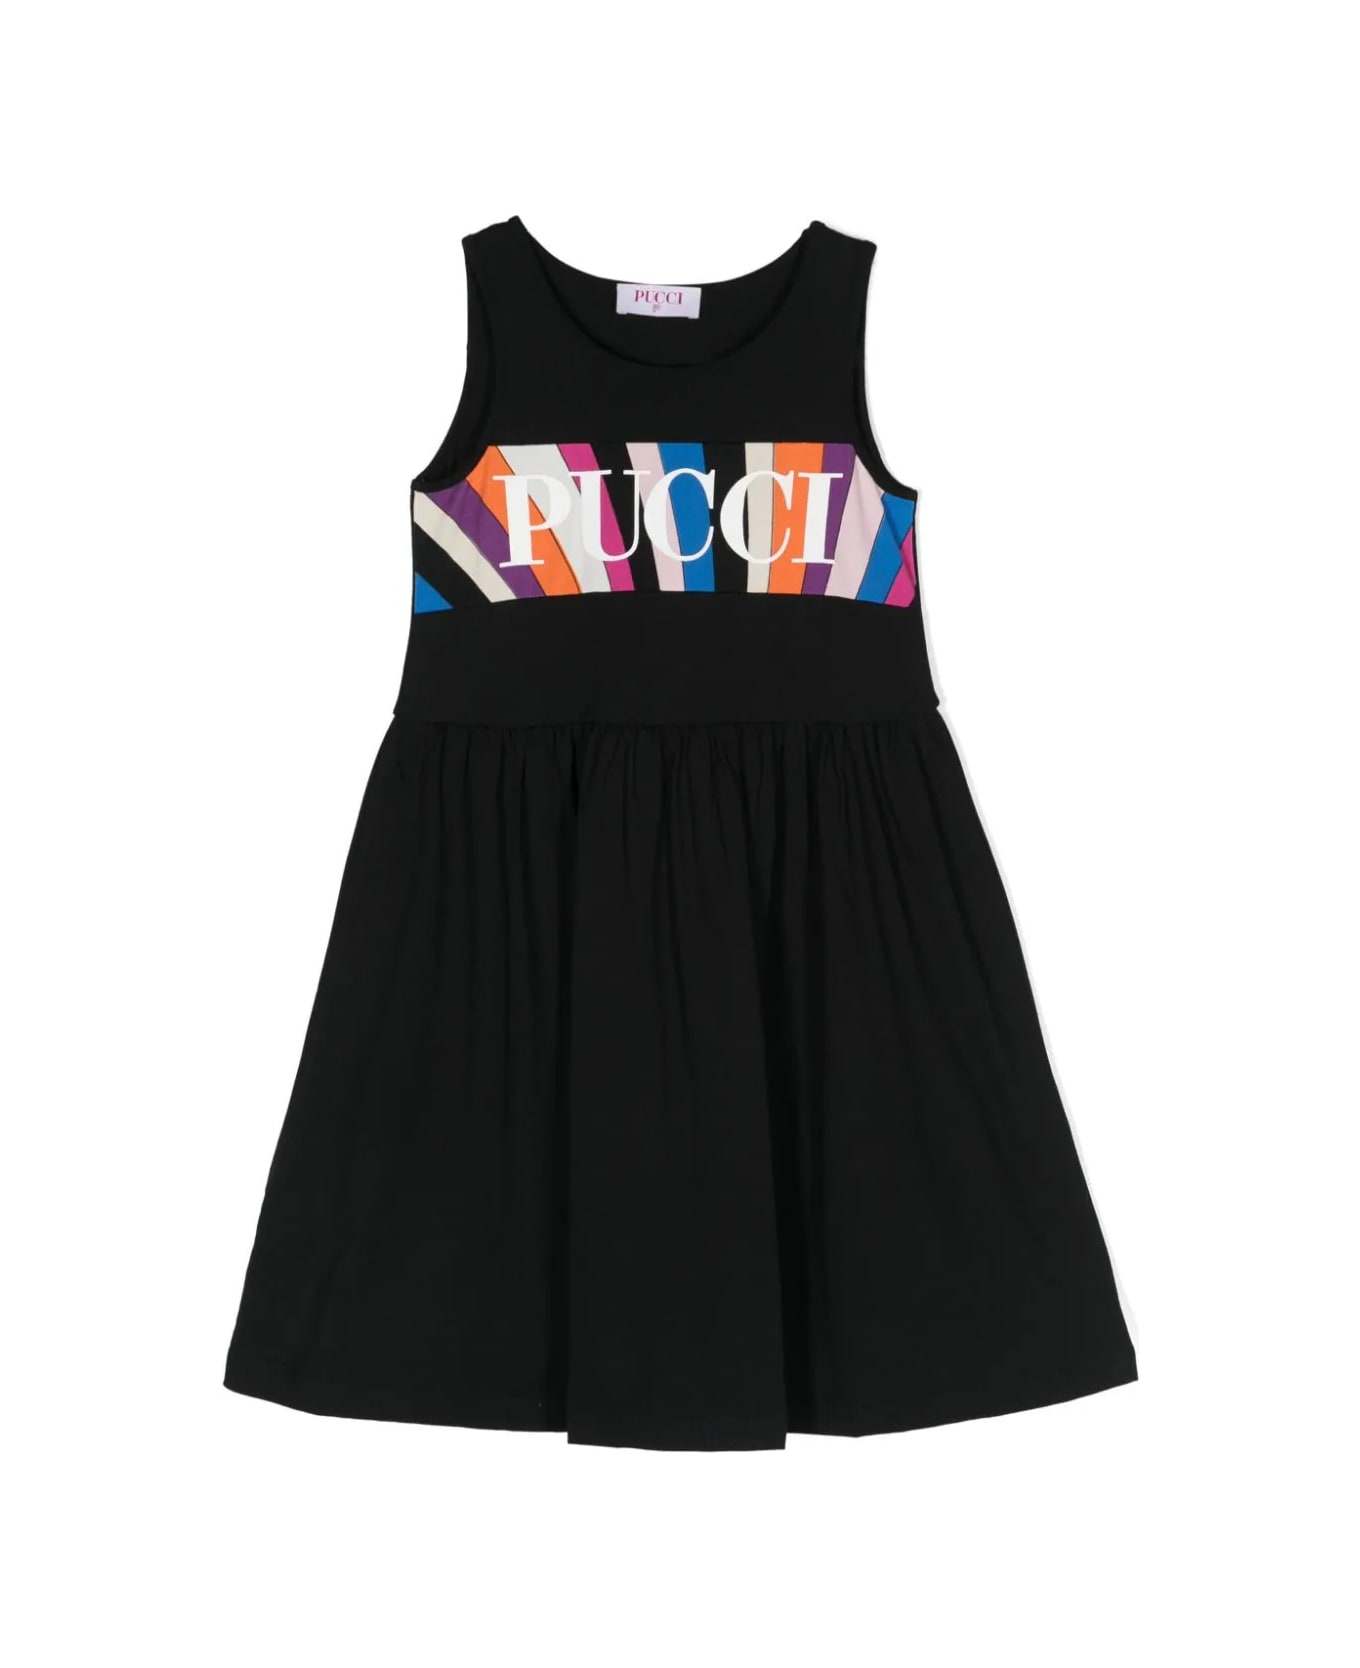 Pucci Black Flared Dress With Iride And Logo Print Band - Black